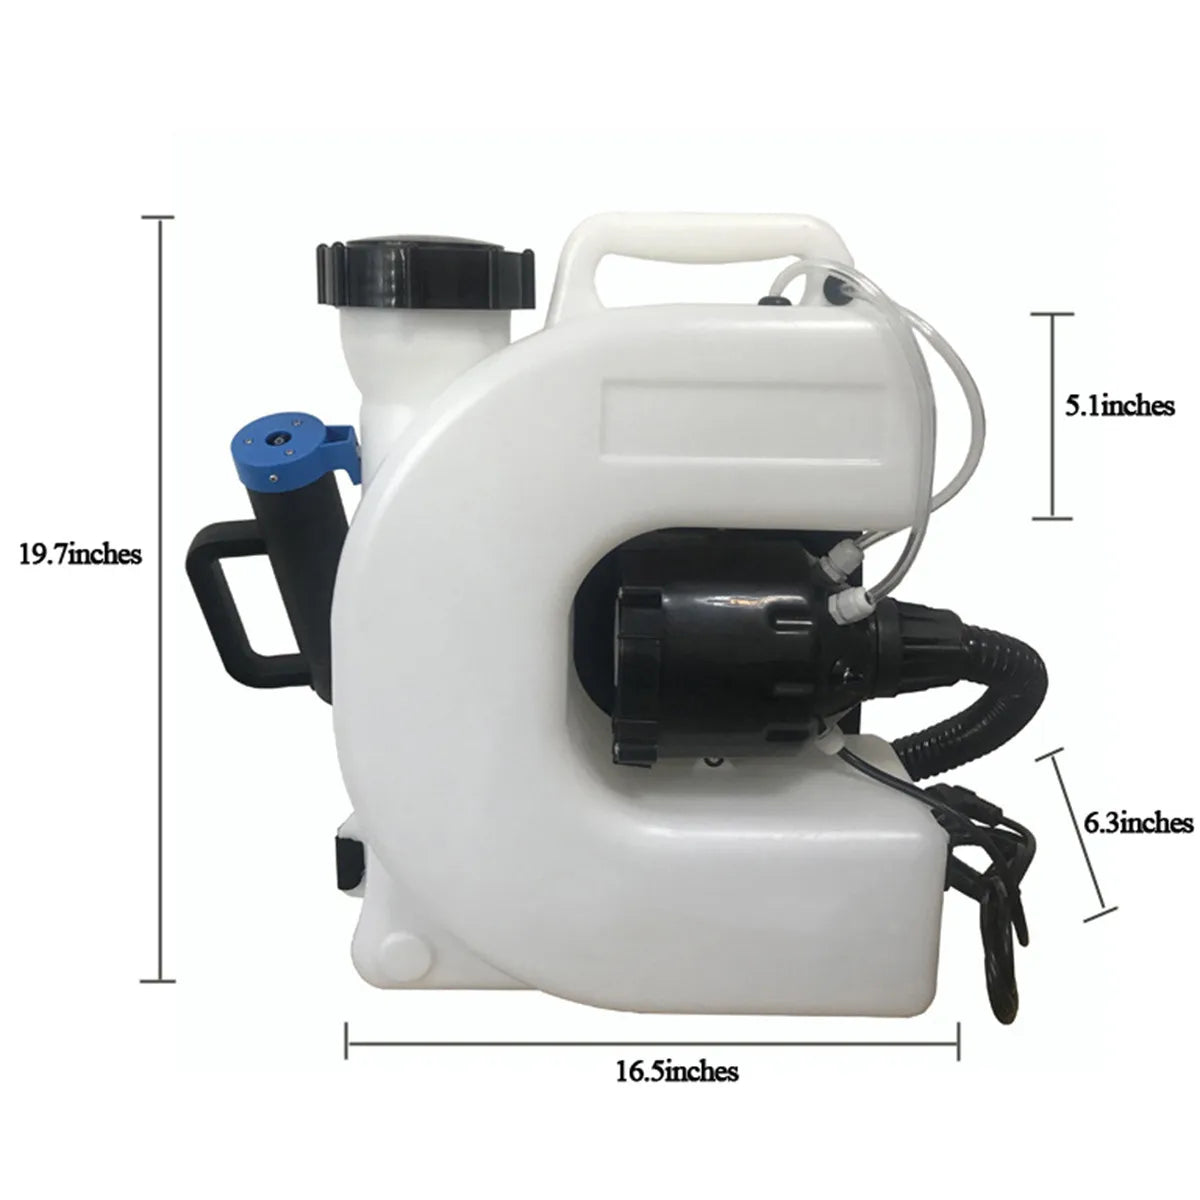 FOGGSTER 15L Electric Backpack ULV Cold Fogger Sprayer 1400W Super-C Disinfection Machine